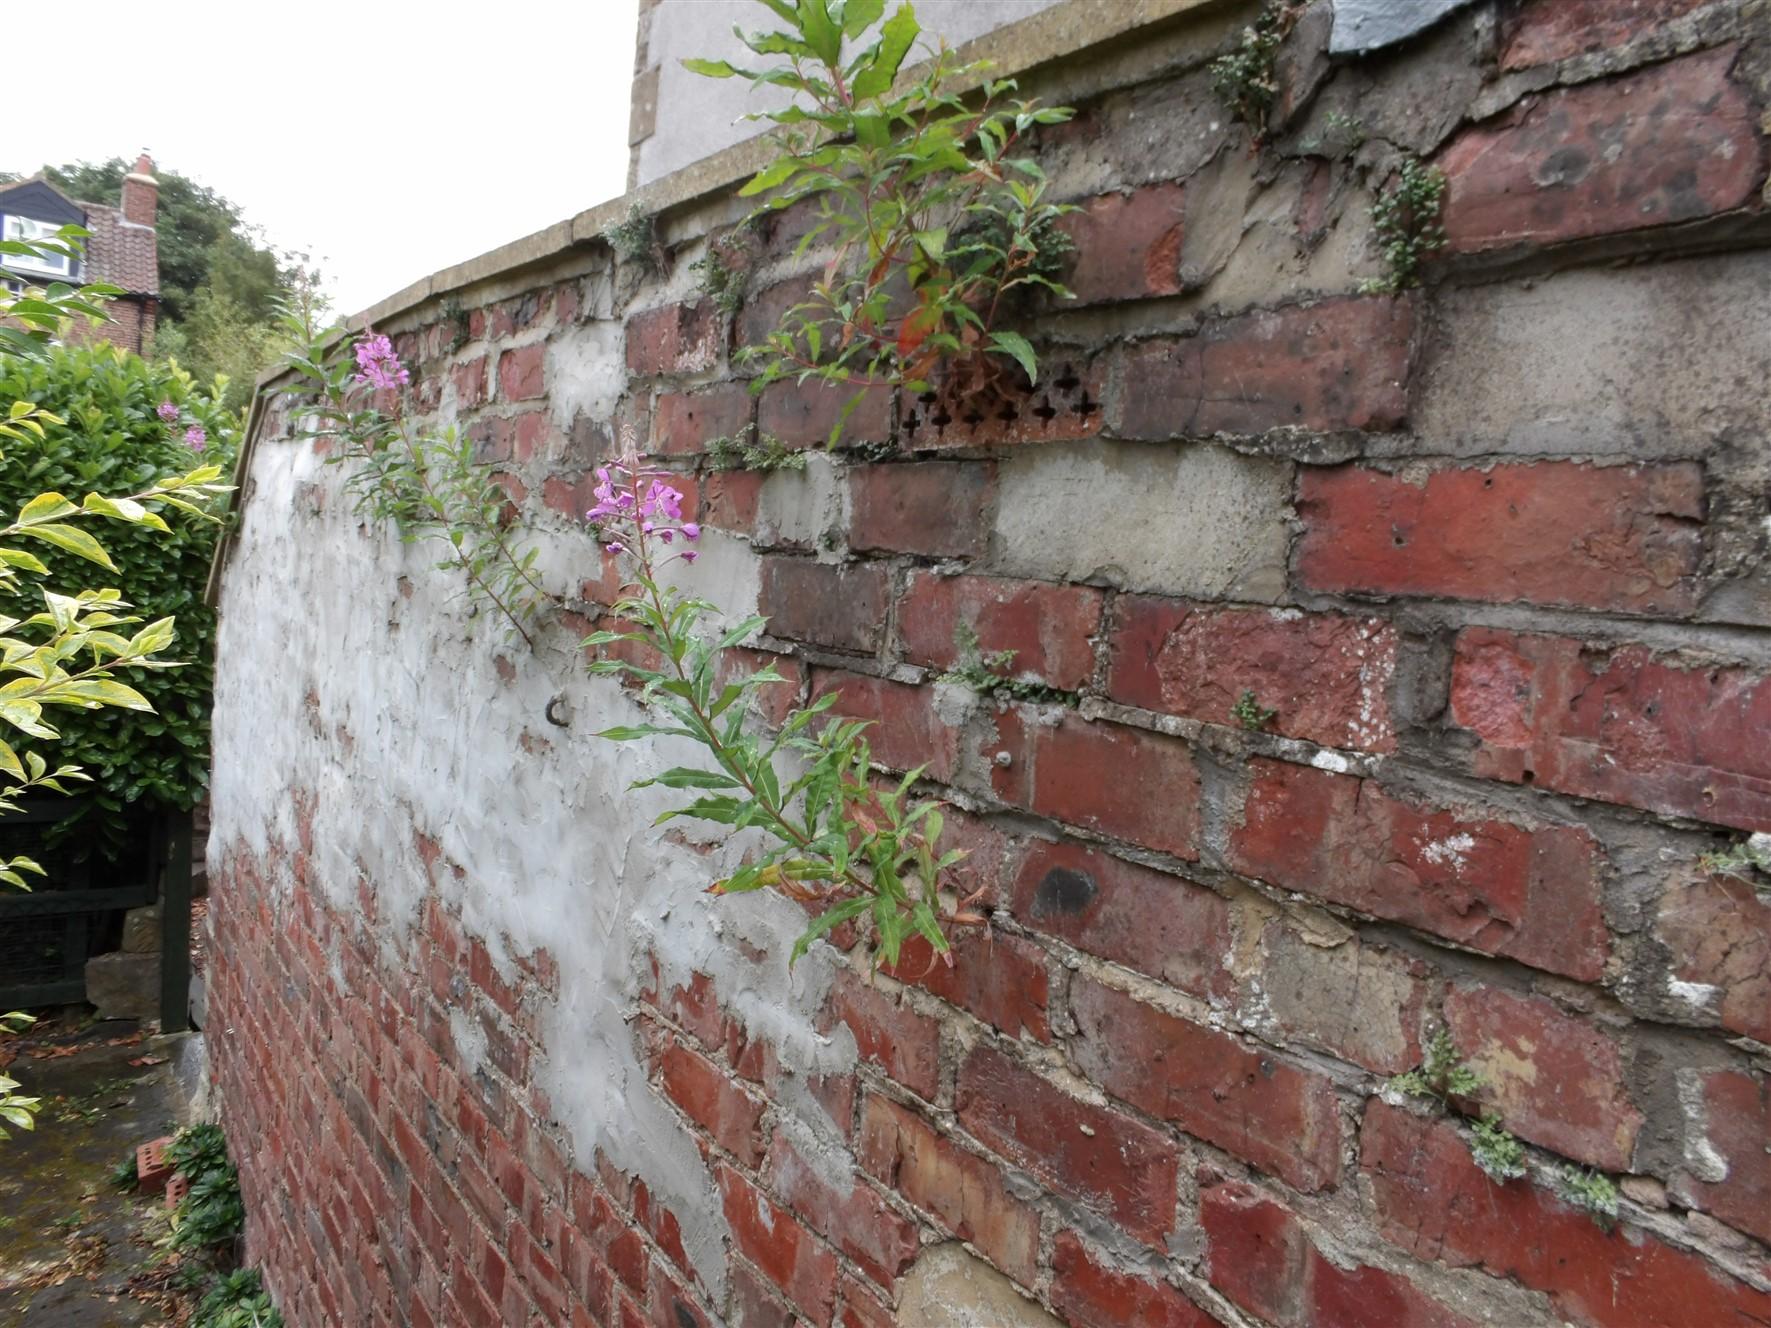 More pesky weeds, now growing out of a wall!!!